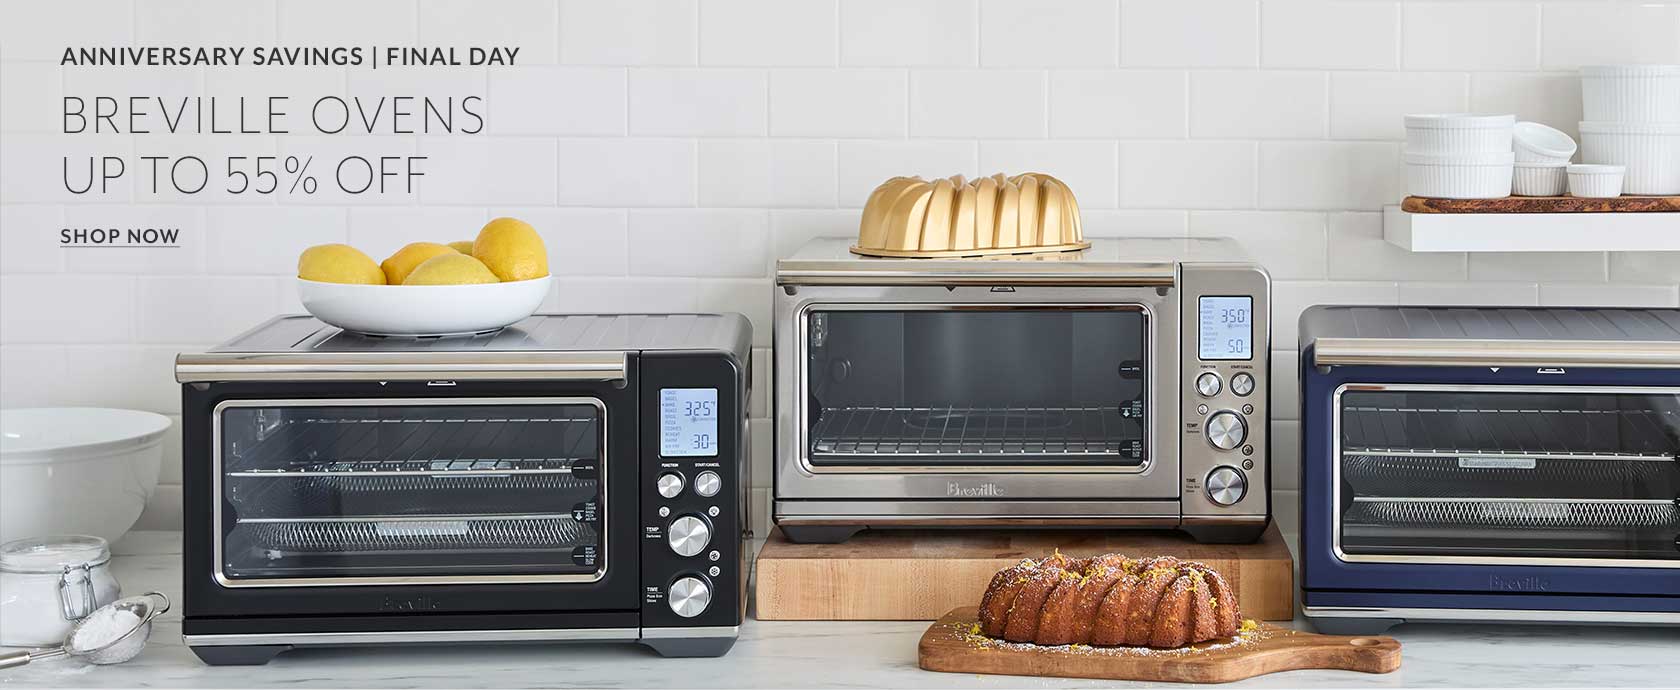 Final Day Anniversary Savings, Breville Ovens up to 55% off, Shop Now.